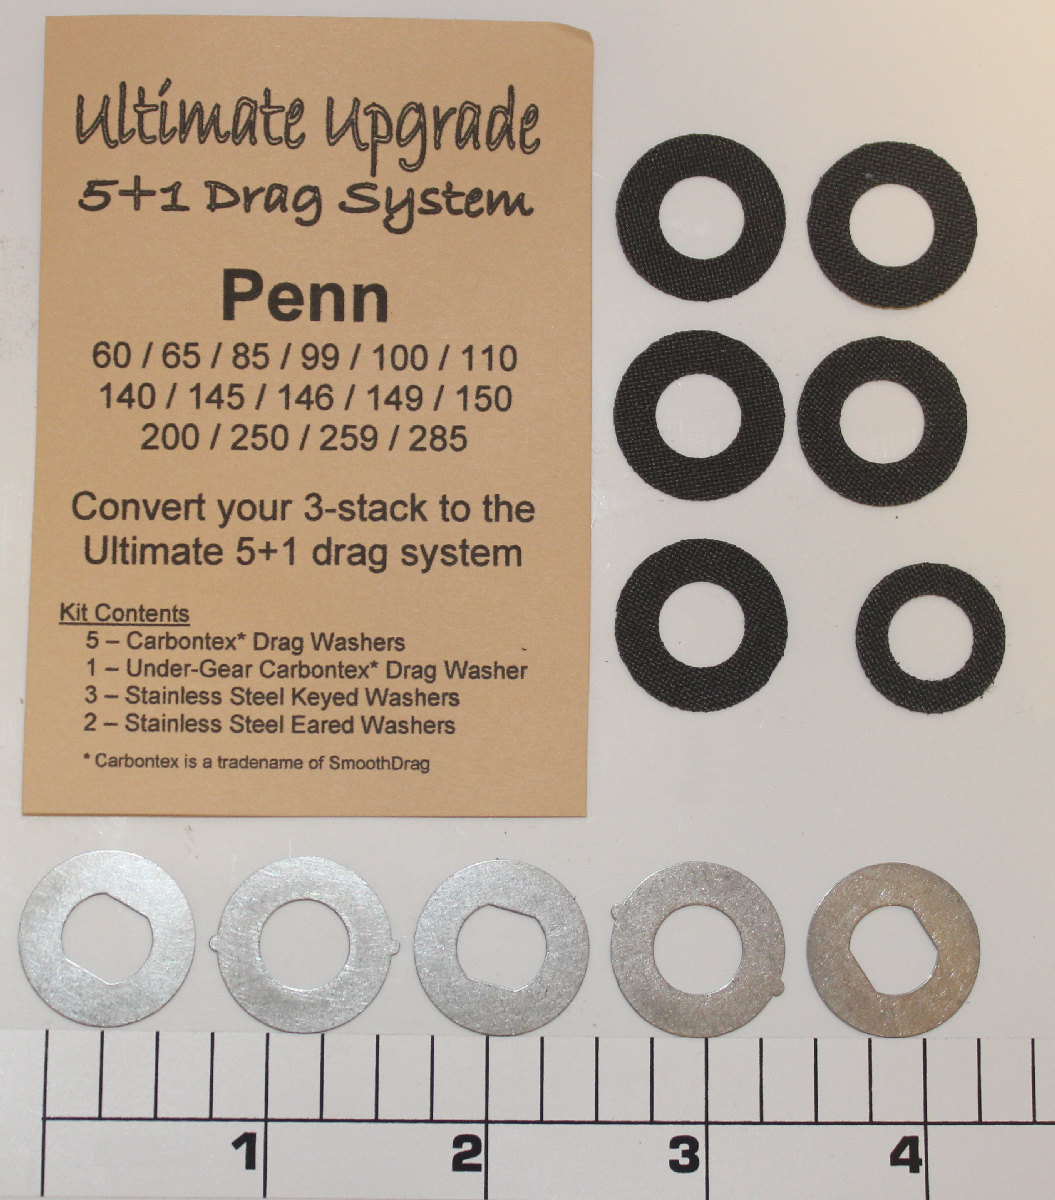 4 PENN HT-100 NEW DRAG WASHERS TO UPGRADE YOUR GARCIA MITCHELL 302